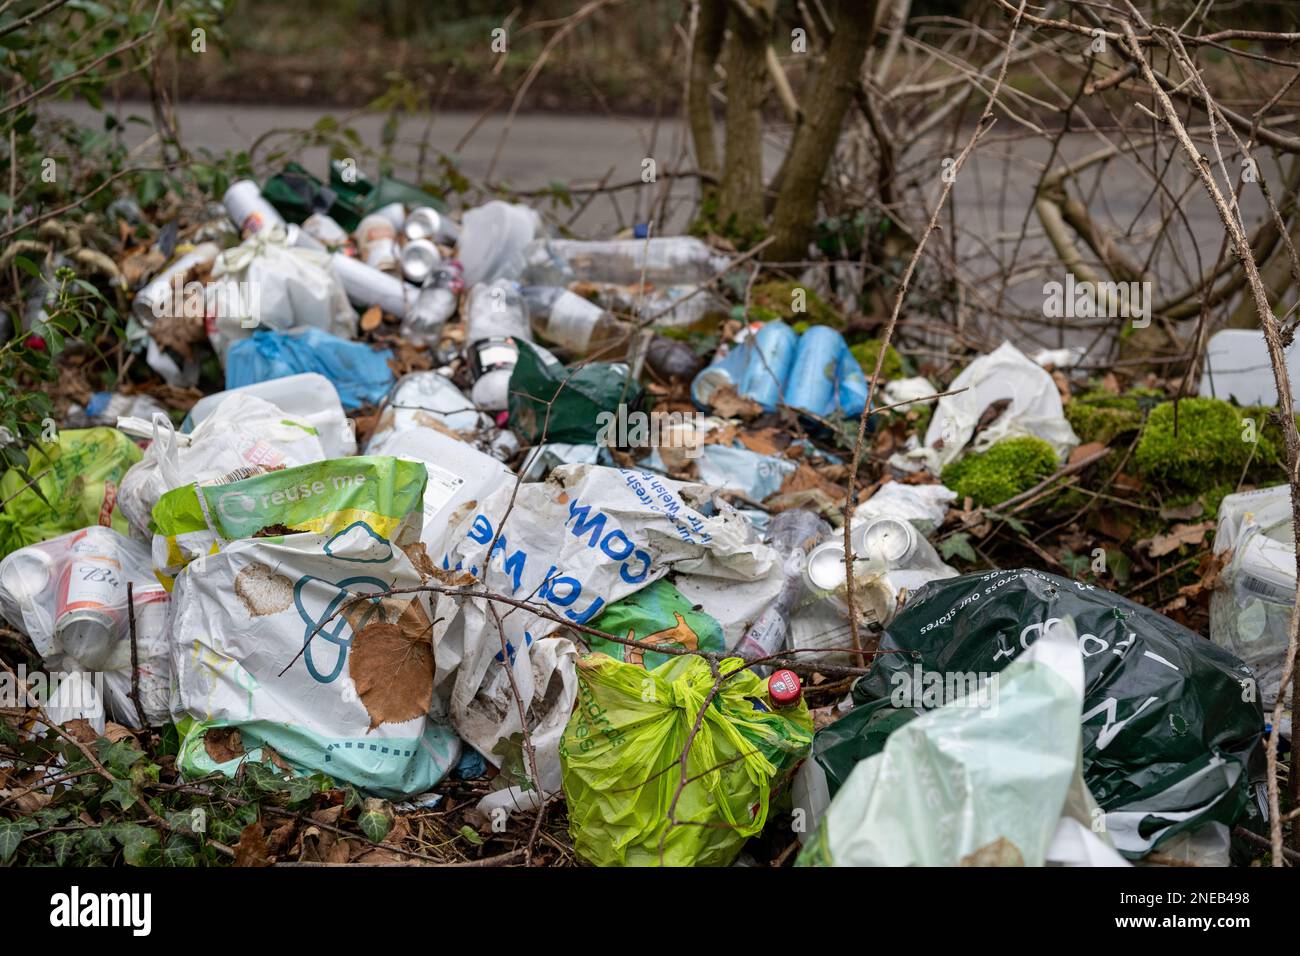 Litter thrown out in a woodland area in a layby on a roadside, Cumbria, UK. Stock Photo